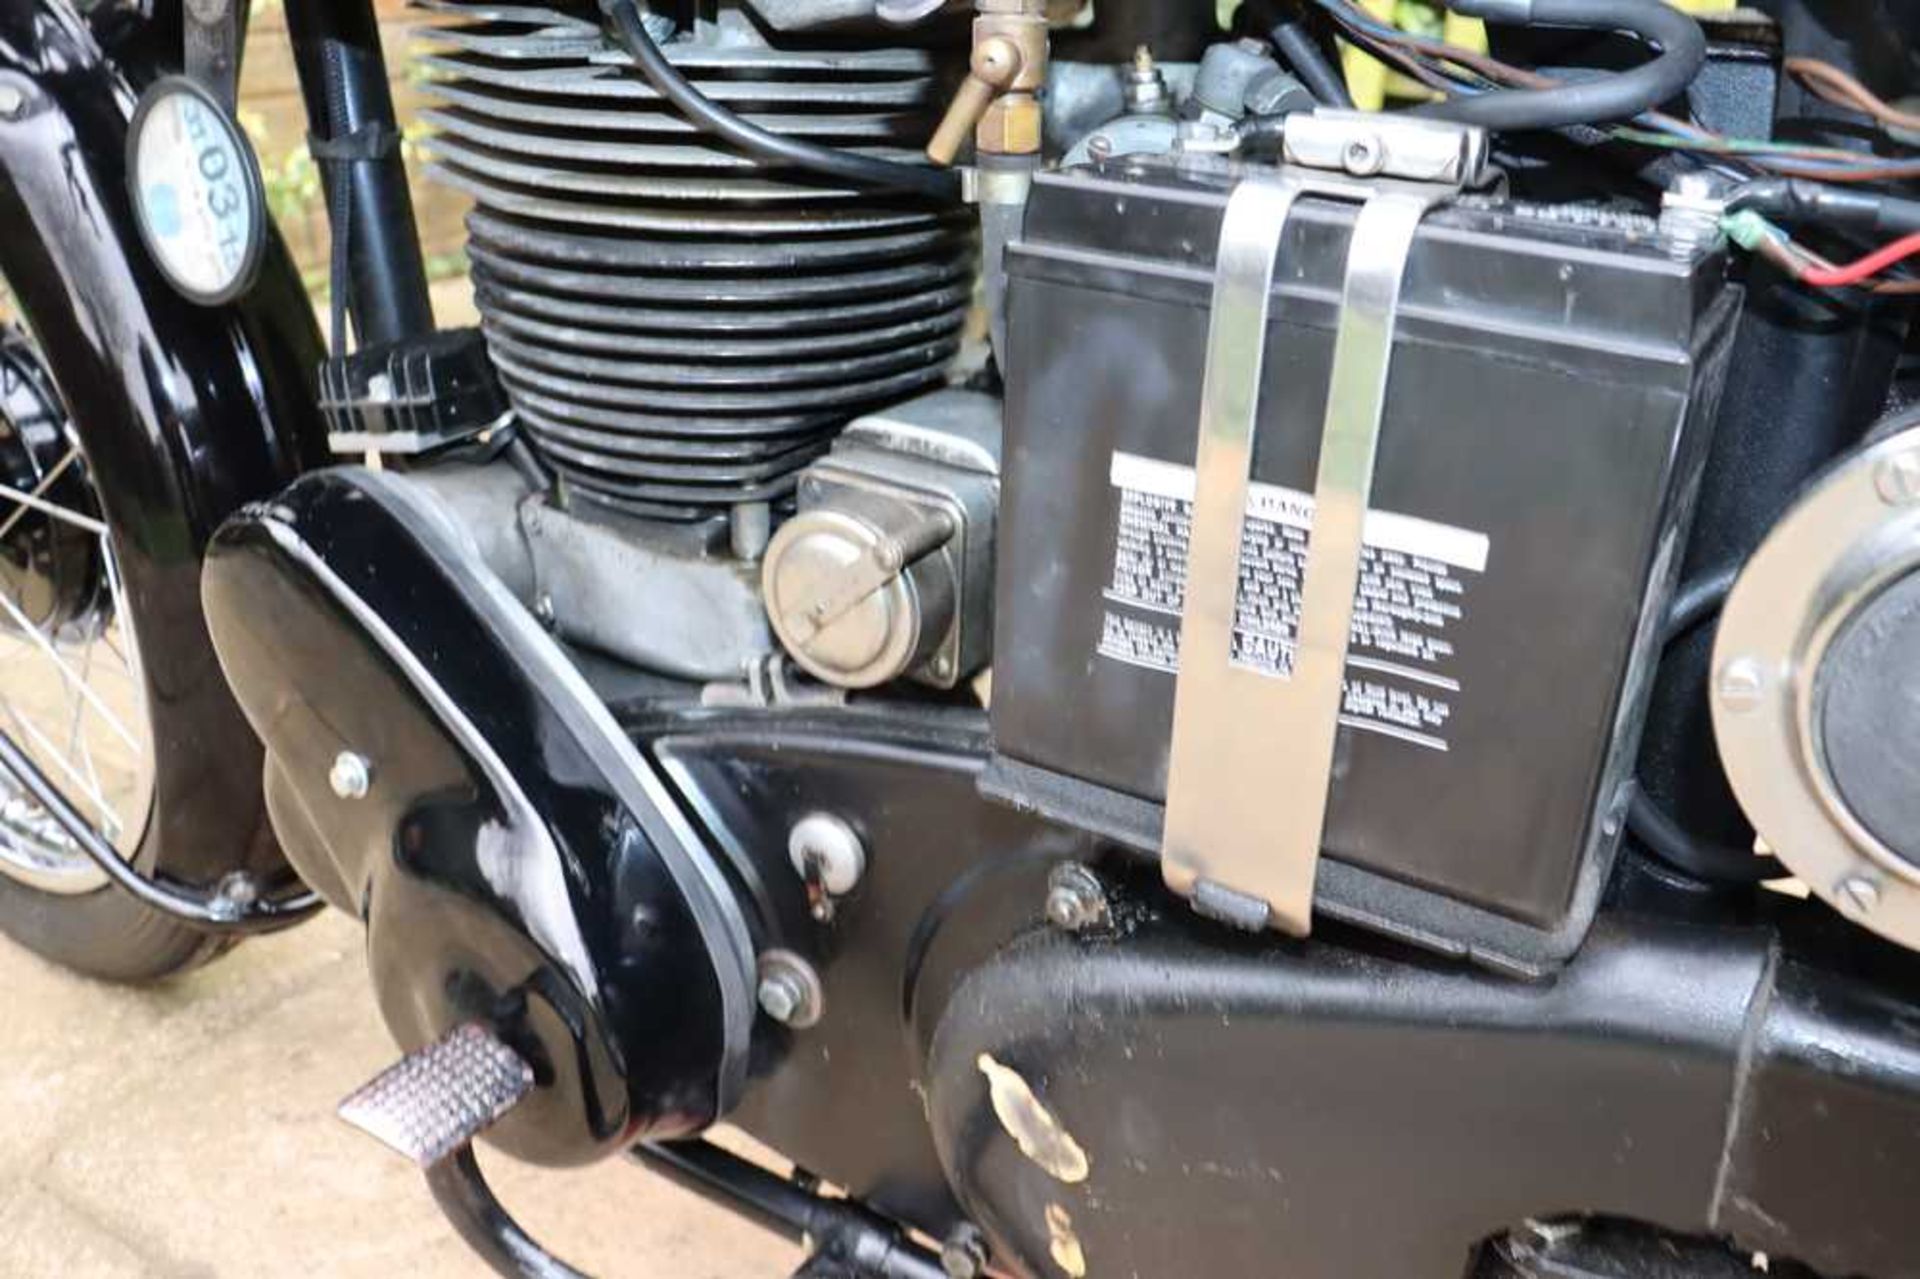 1954 Velocette MSS Fitted with an Alton electric starter kit - Image 30 of 41